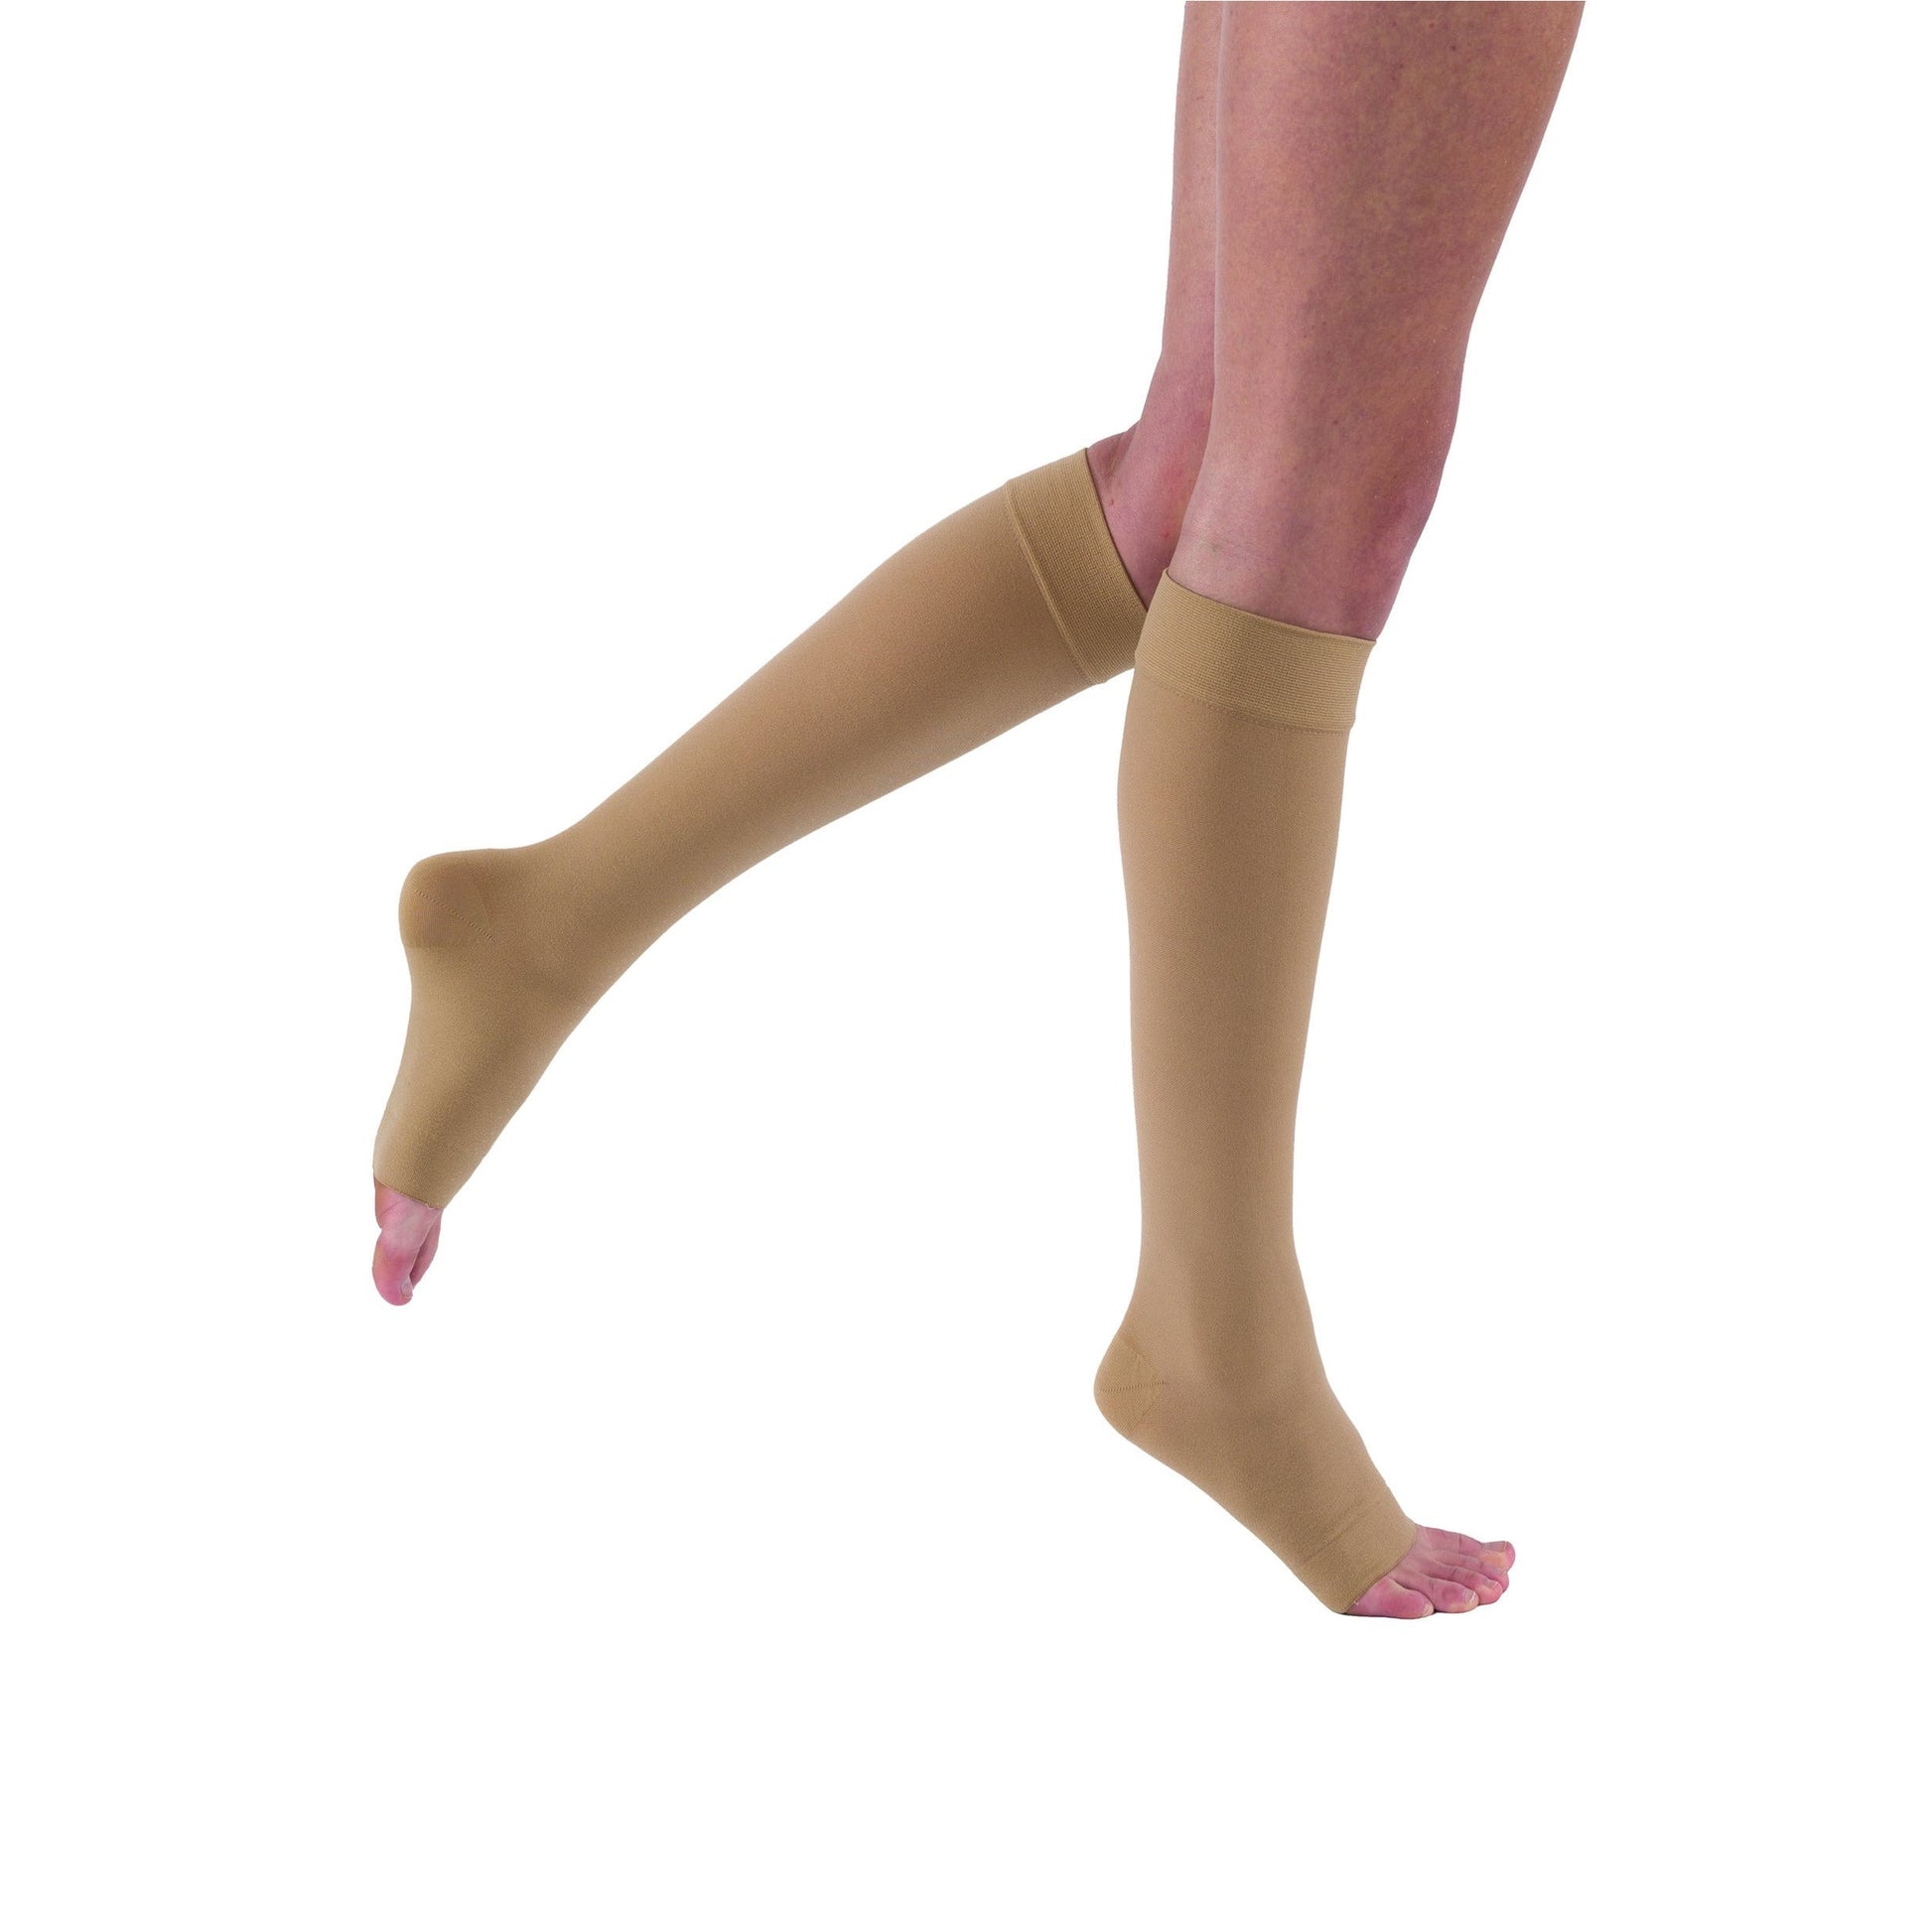 Medi Comfort Support Knee Highs 30-40mmHg - Wide Calf – Compression  Stockings